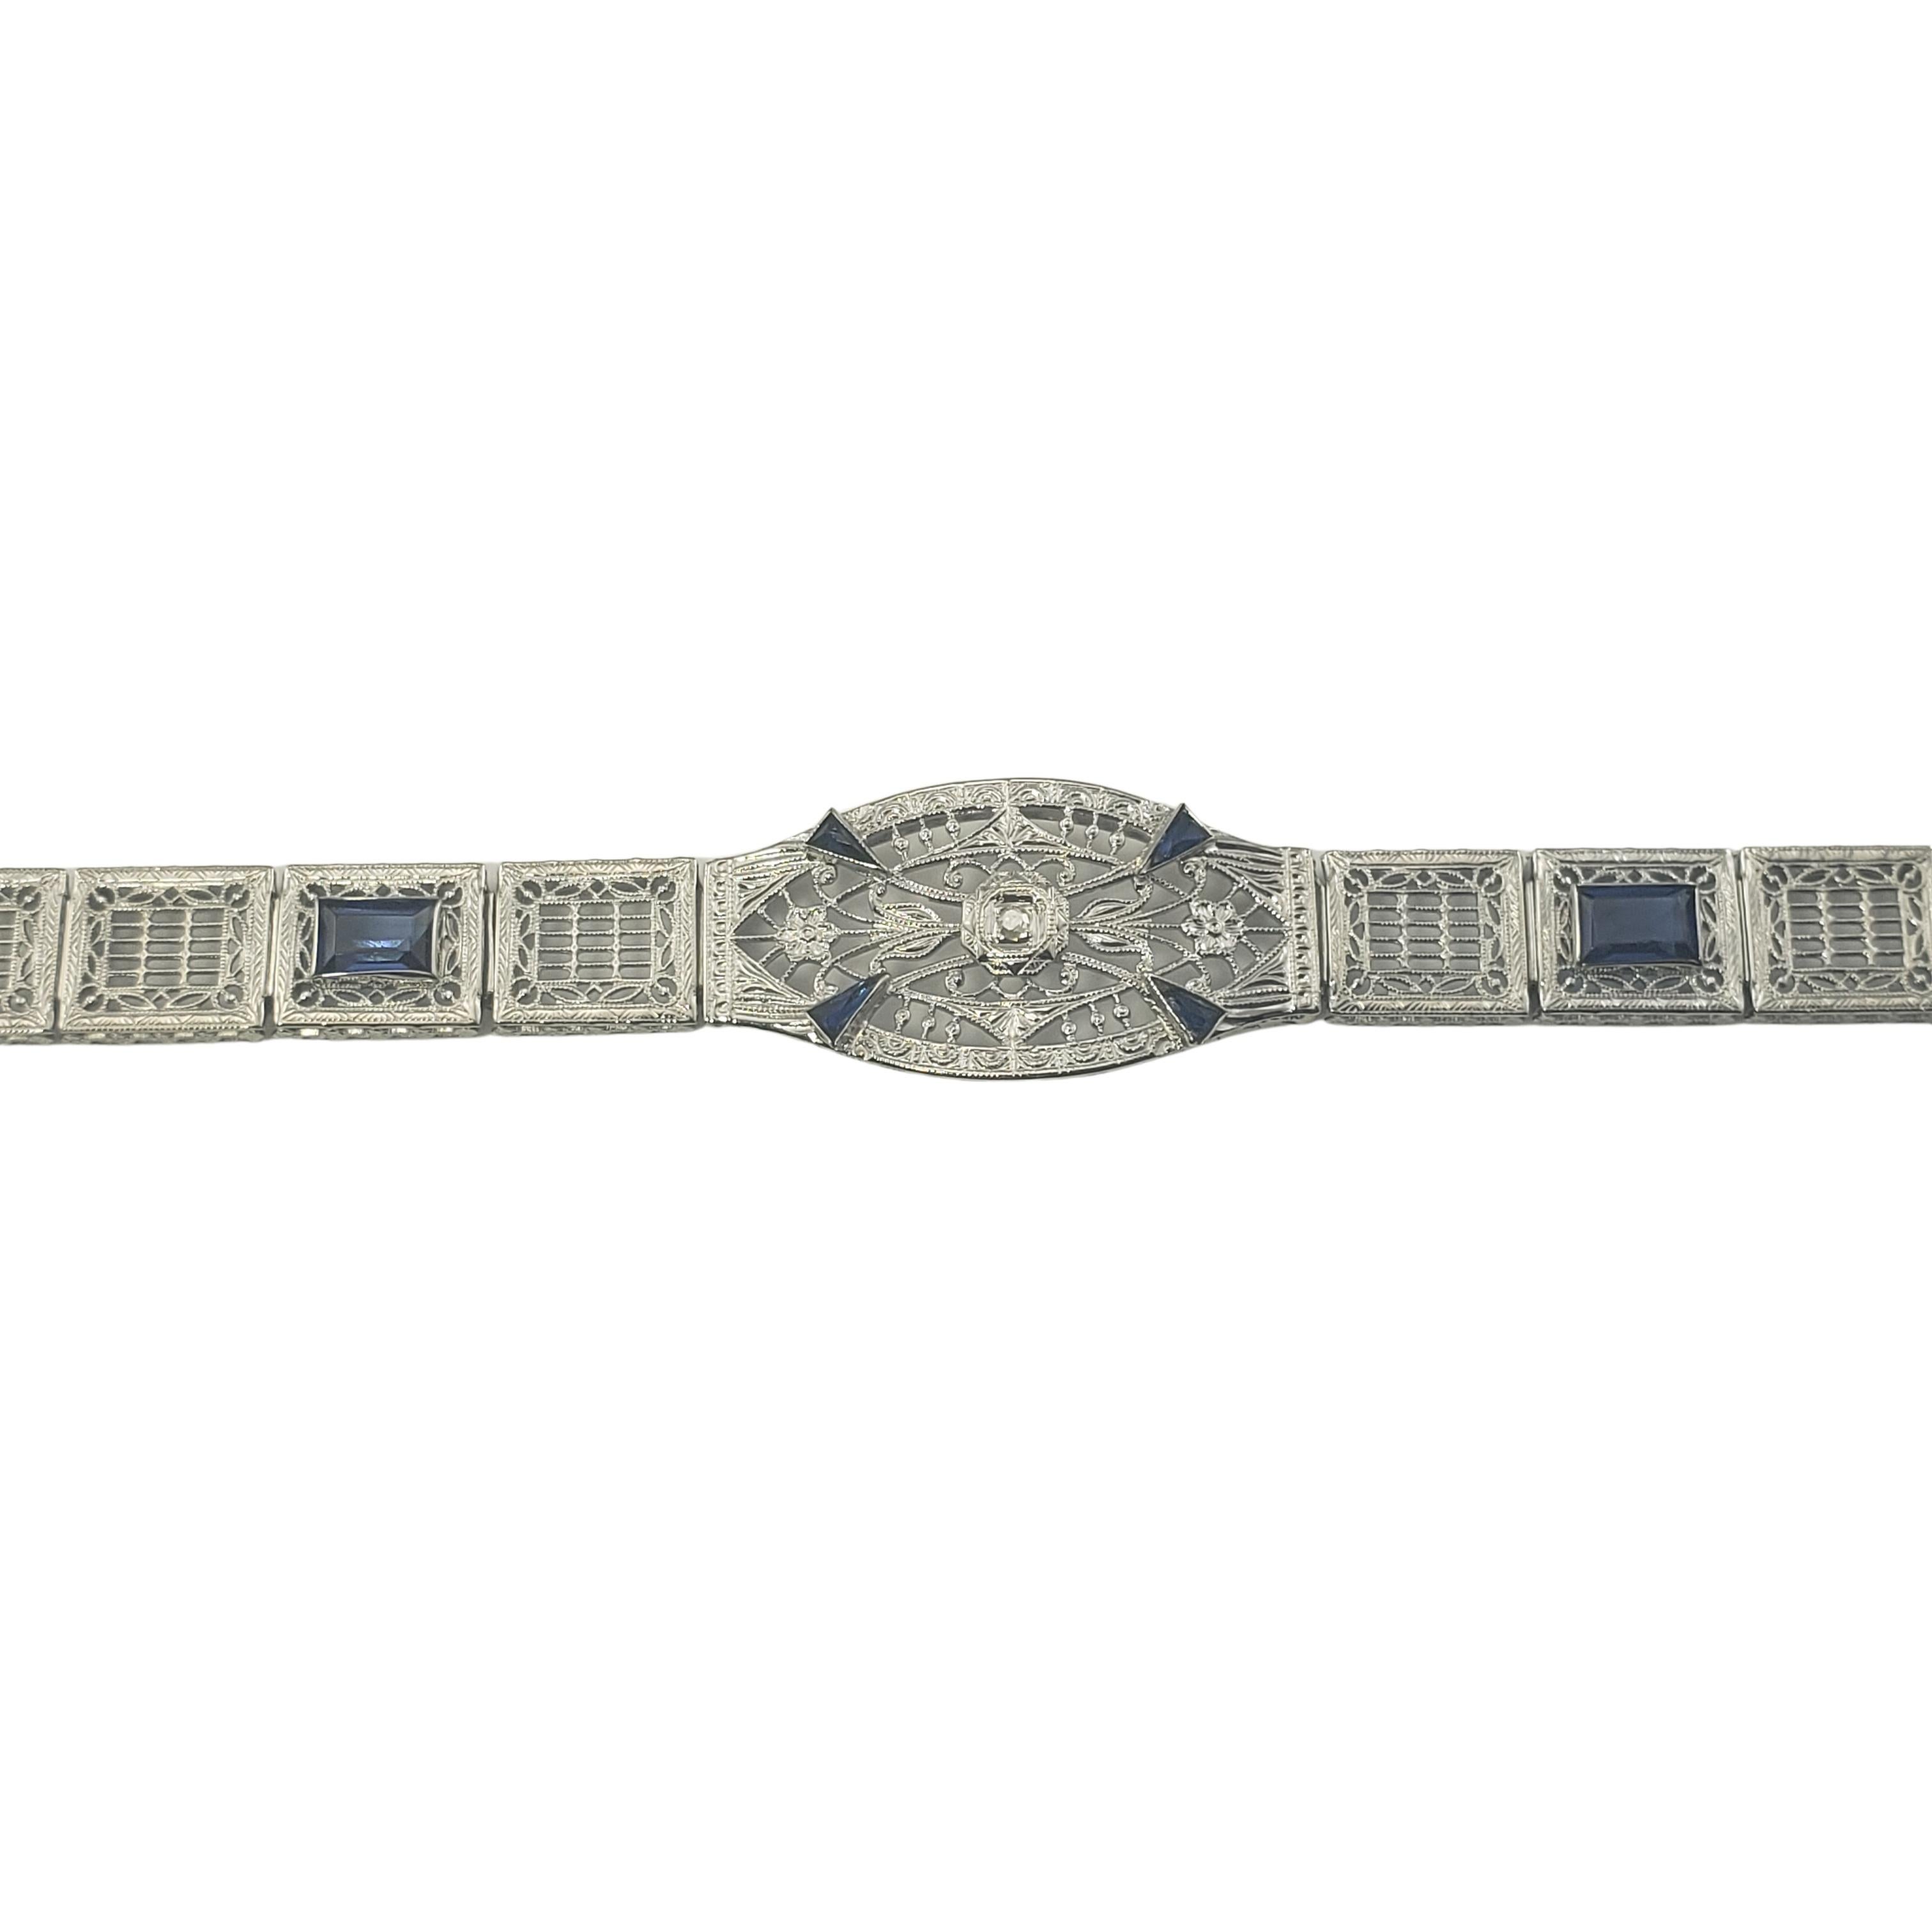 Vintage 14 Karat White Gold Filigree Diamond and Faceted Blue Stone Bracelet-

This stunning bracelet features one round single cut diamond and four faceted blue stones set in beautifully detailed 14K white gold filigree.  Width:  16